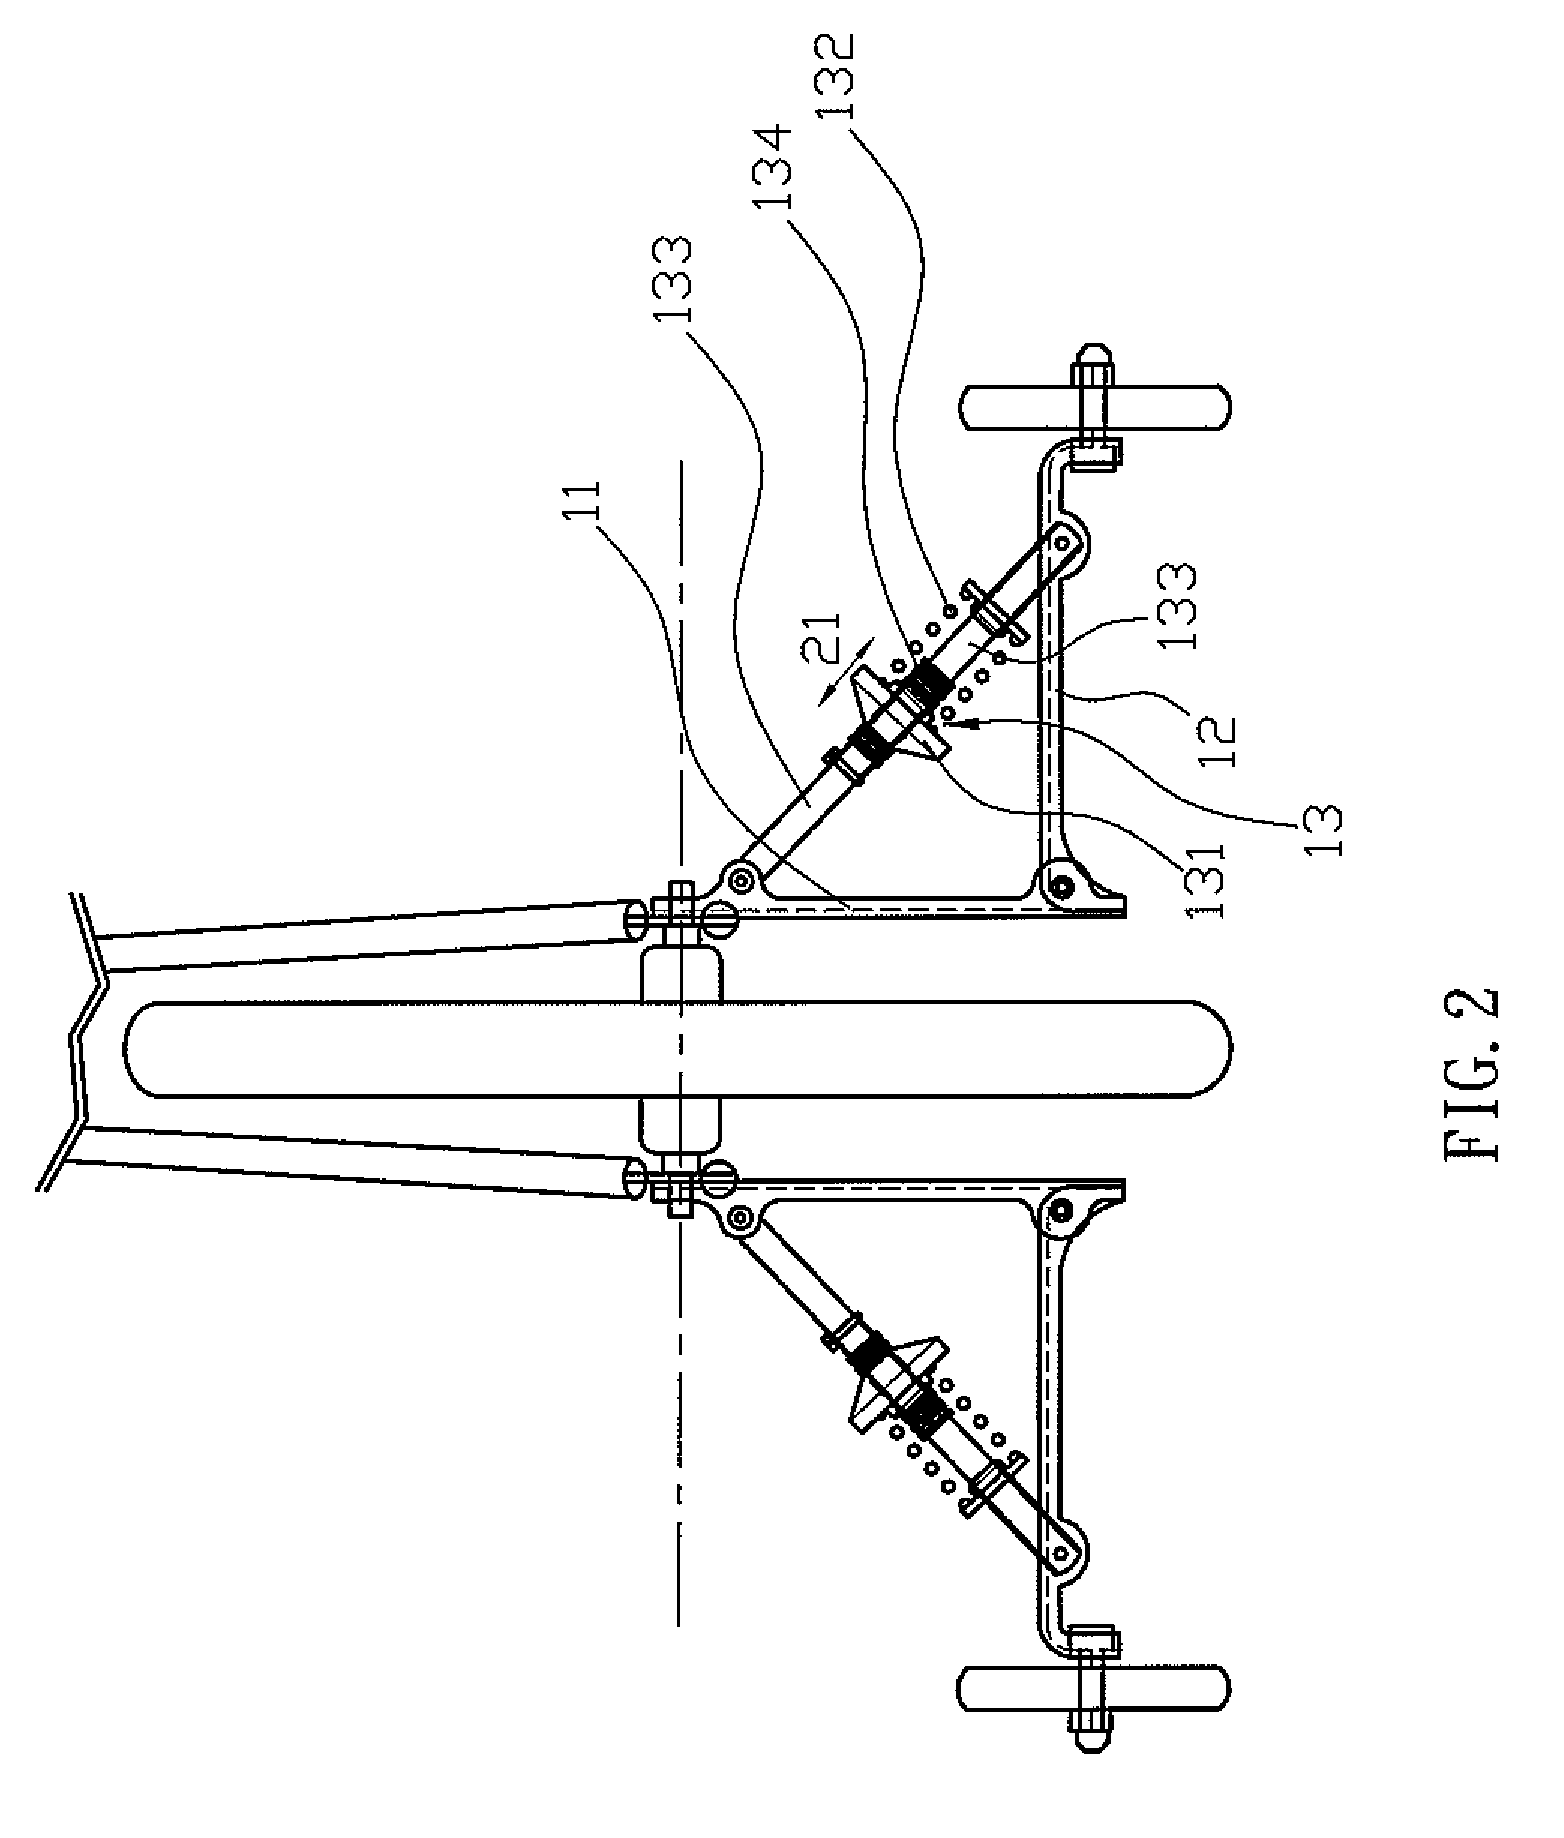 Bicycle training wheel assembly having a tension adjustable function